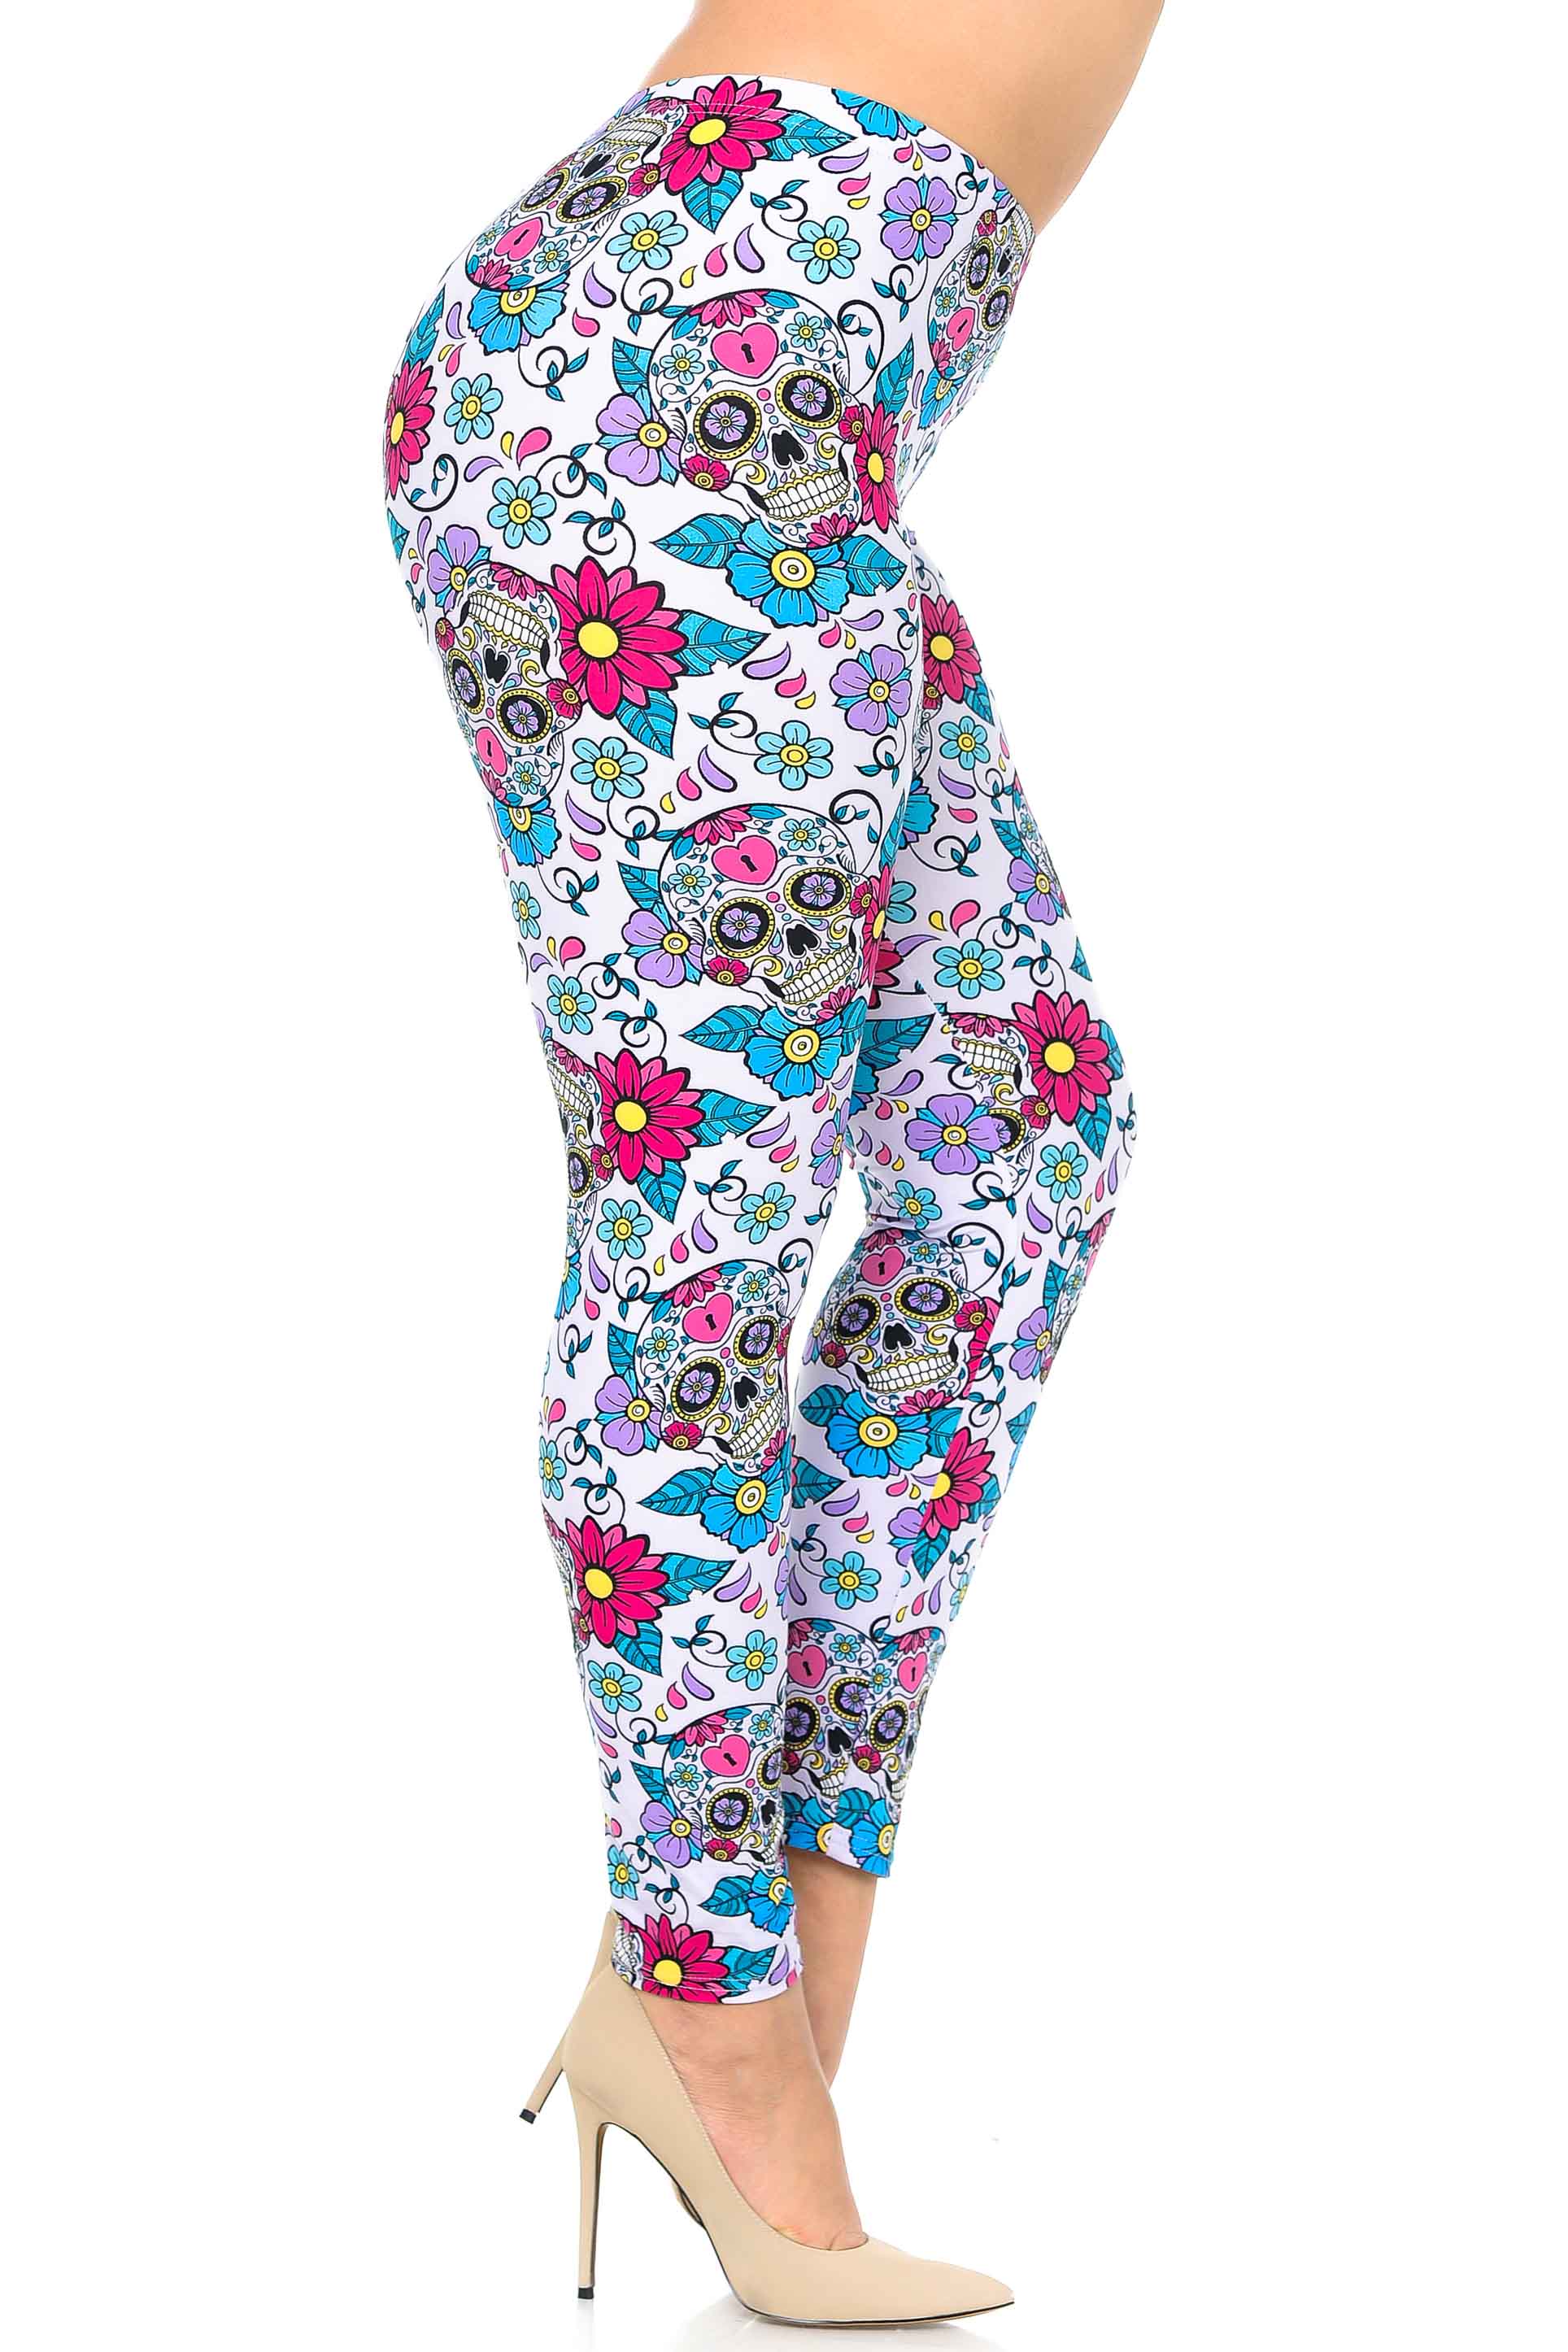 Wholesale Buttery Smooth Lavender Sugar Skull Plus Size Leggings